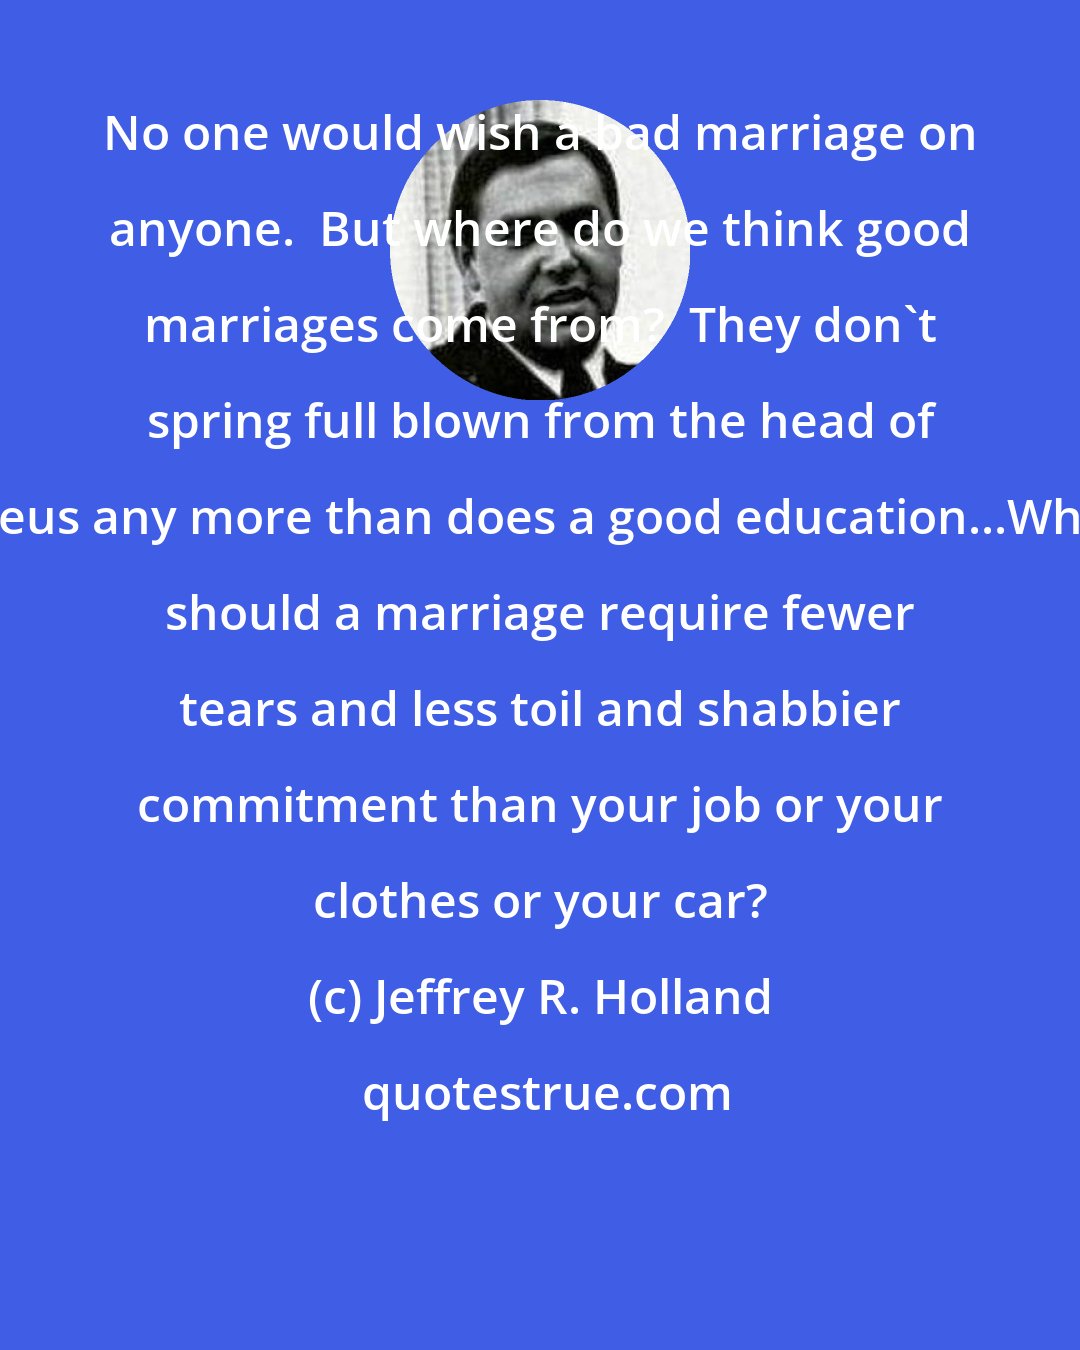 Jeffrey R. Holland: No one would wish a bad marriage on anyone.  But where do we think good marriages come from?  They don't spring full blown from the head of Zeus any more than does a good education...Why should a marriage require fewer tears and less toil and shabbier commitment than your job or your clothes or your car?